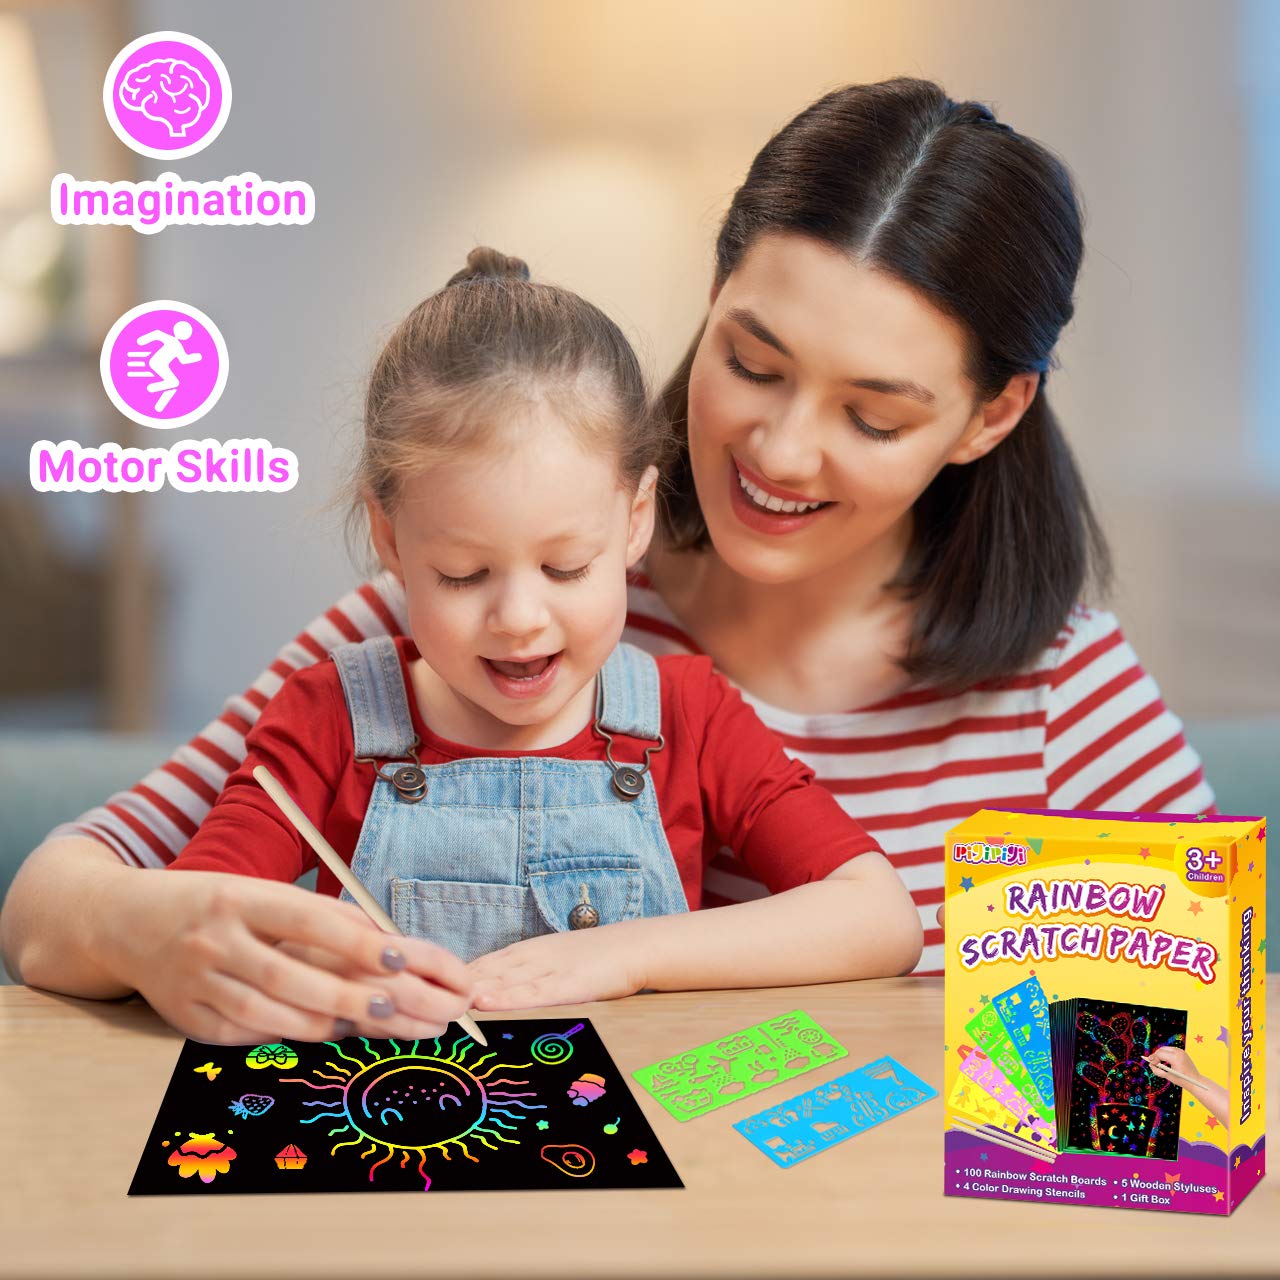 pigipigi Rainbow Scratch Paper Art - 109 Pcs Magic Scratch Off Craft Kit for Kids Color Drawing Note Pad Supply for Children Girls Boys DIY Party Favor Game Activity Birthday Christmas Toy Gift Set